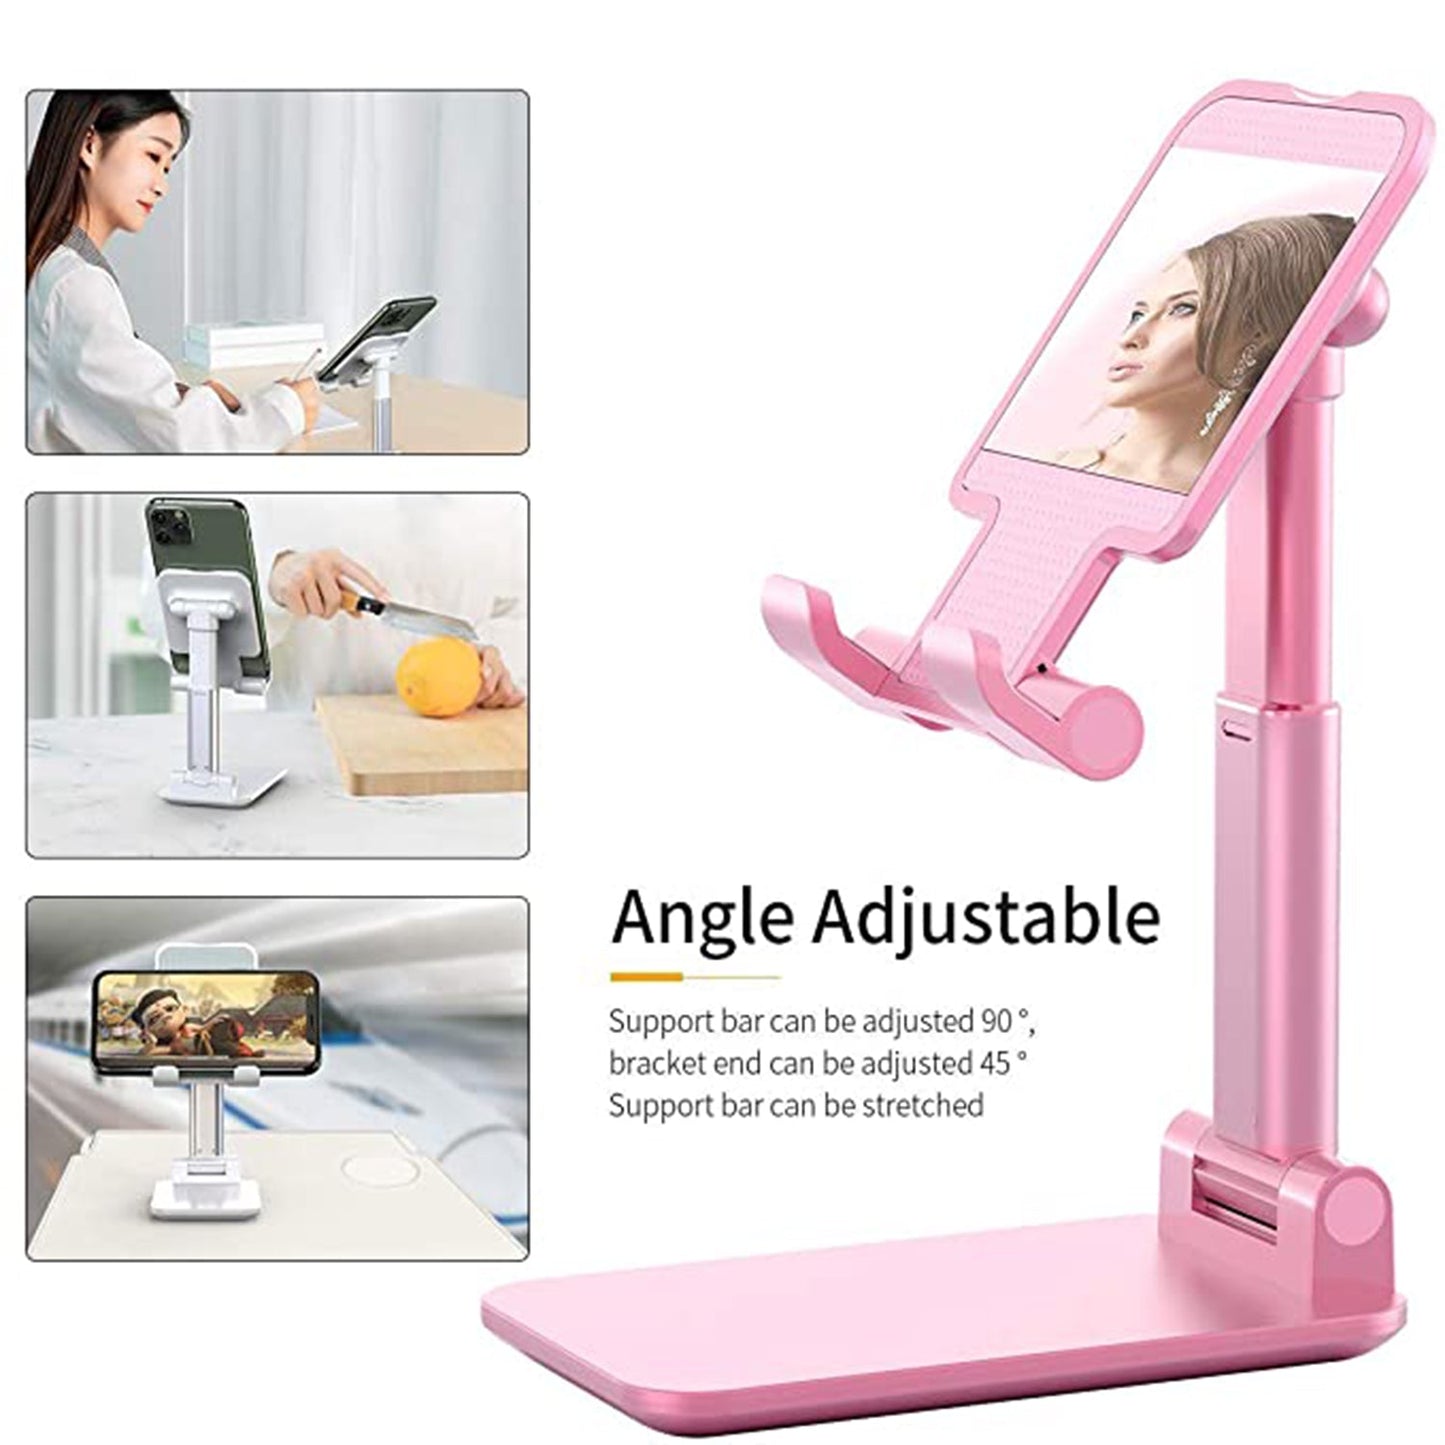 Desktop Cell Phone Stand with mirror Full 3-Way Adjustable Phone Stand for Desk Height + Angles